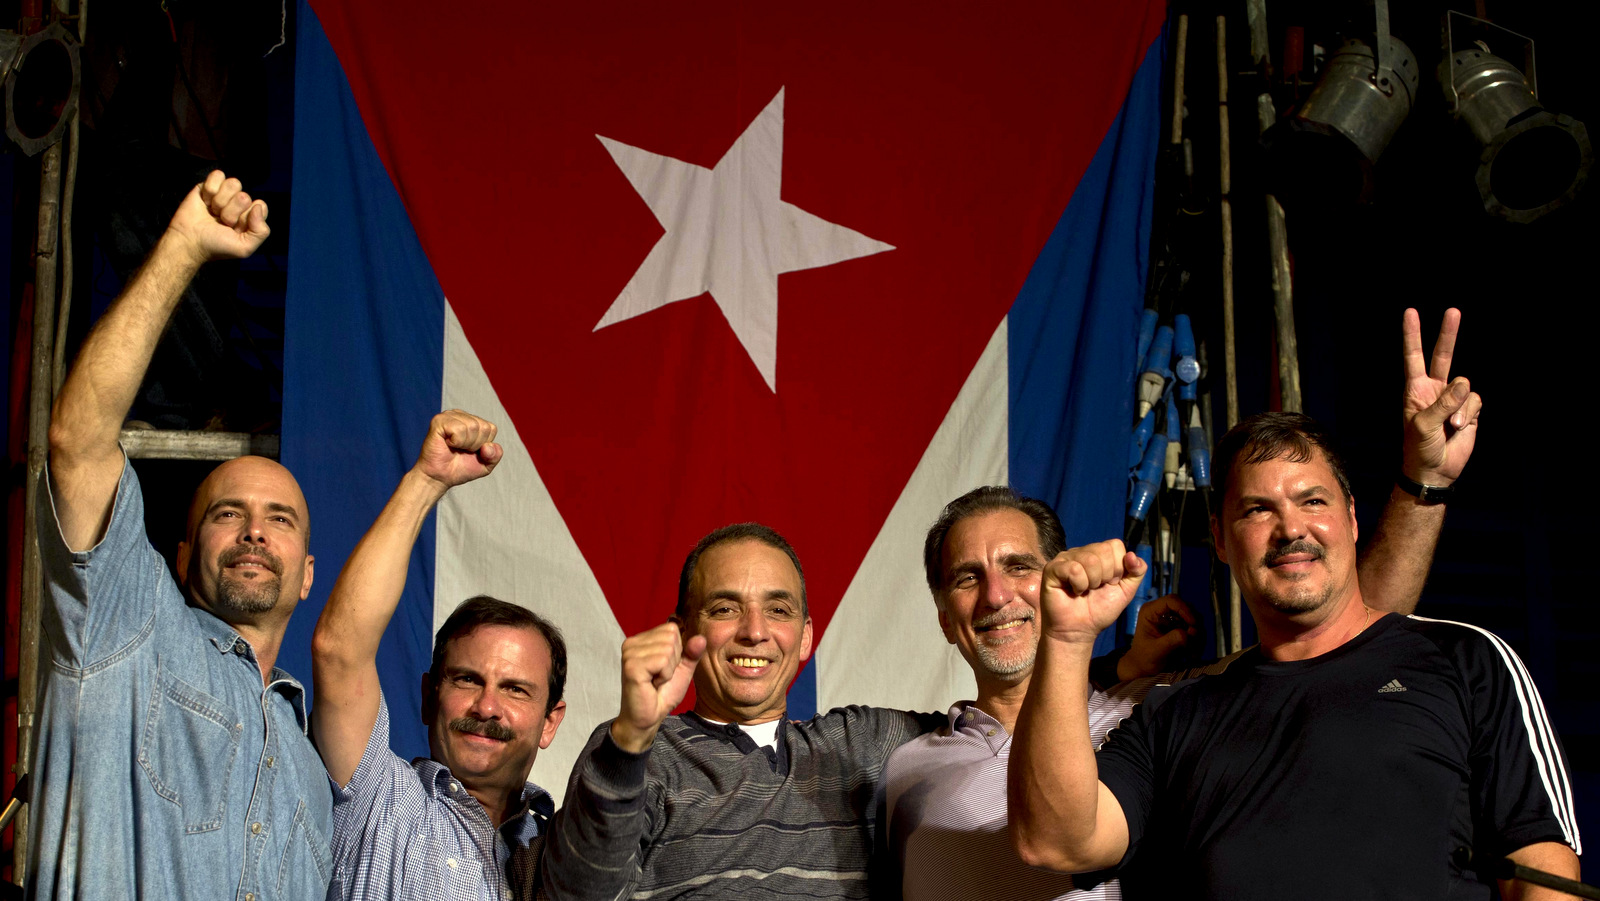  "The Cuban Five," from left, Gerardo Hernandez, Fernando Gonzalez, Antonio Guerrero, Rene Gonzalez and Ramon Labanino, wave to the public in front of a Cuban flag after a concert by Silvio Rodriguez in Havana, Cuba. Guerrero, Labanino, and Hernandez flew back to their homeland in a quiet exchange of imprisoned spies, part of a historic agreement to restore relations between the two long-hostile countries. Fernando and Rene had been previously released by the U.S. (AP Photo/Ramon Espinosa, File)